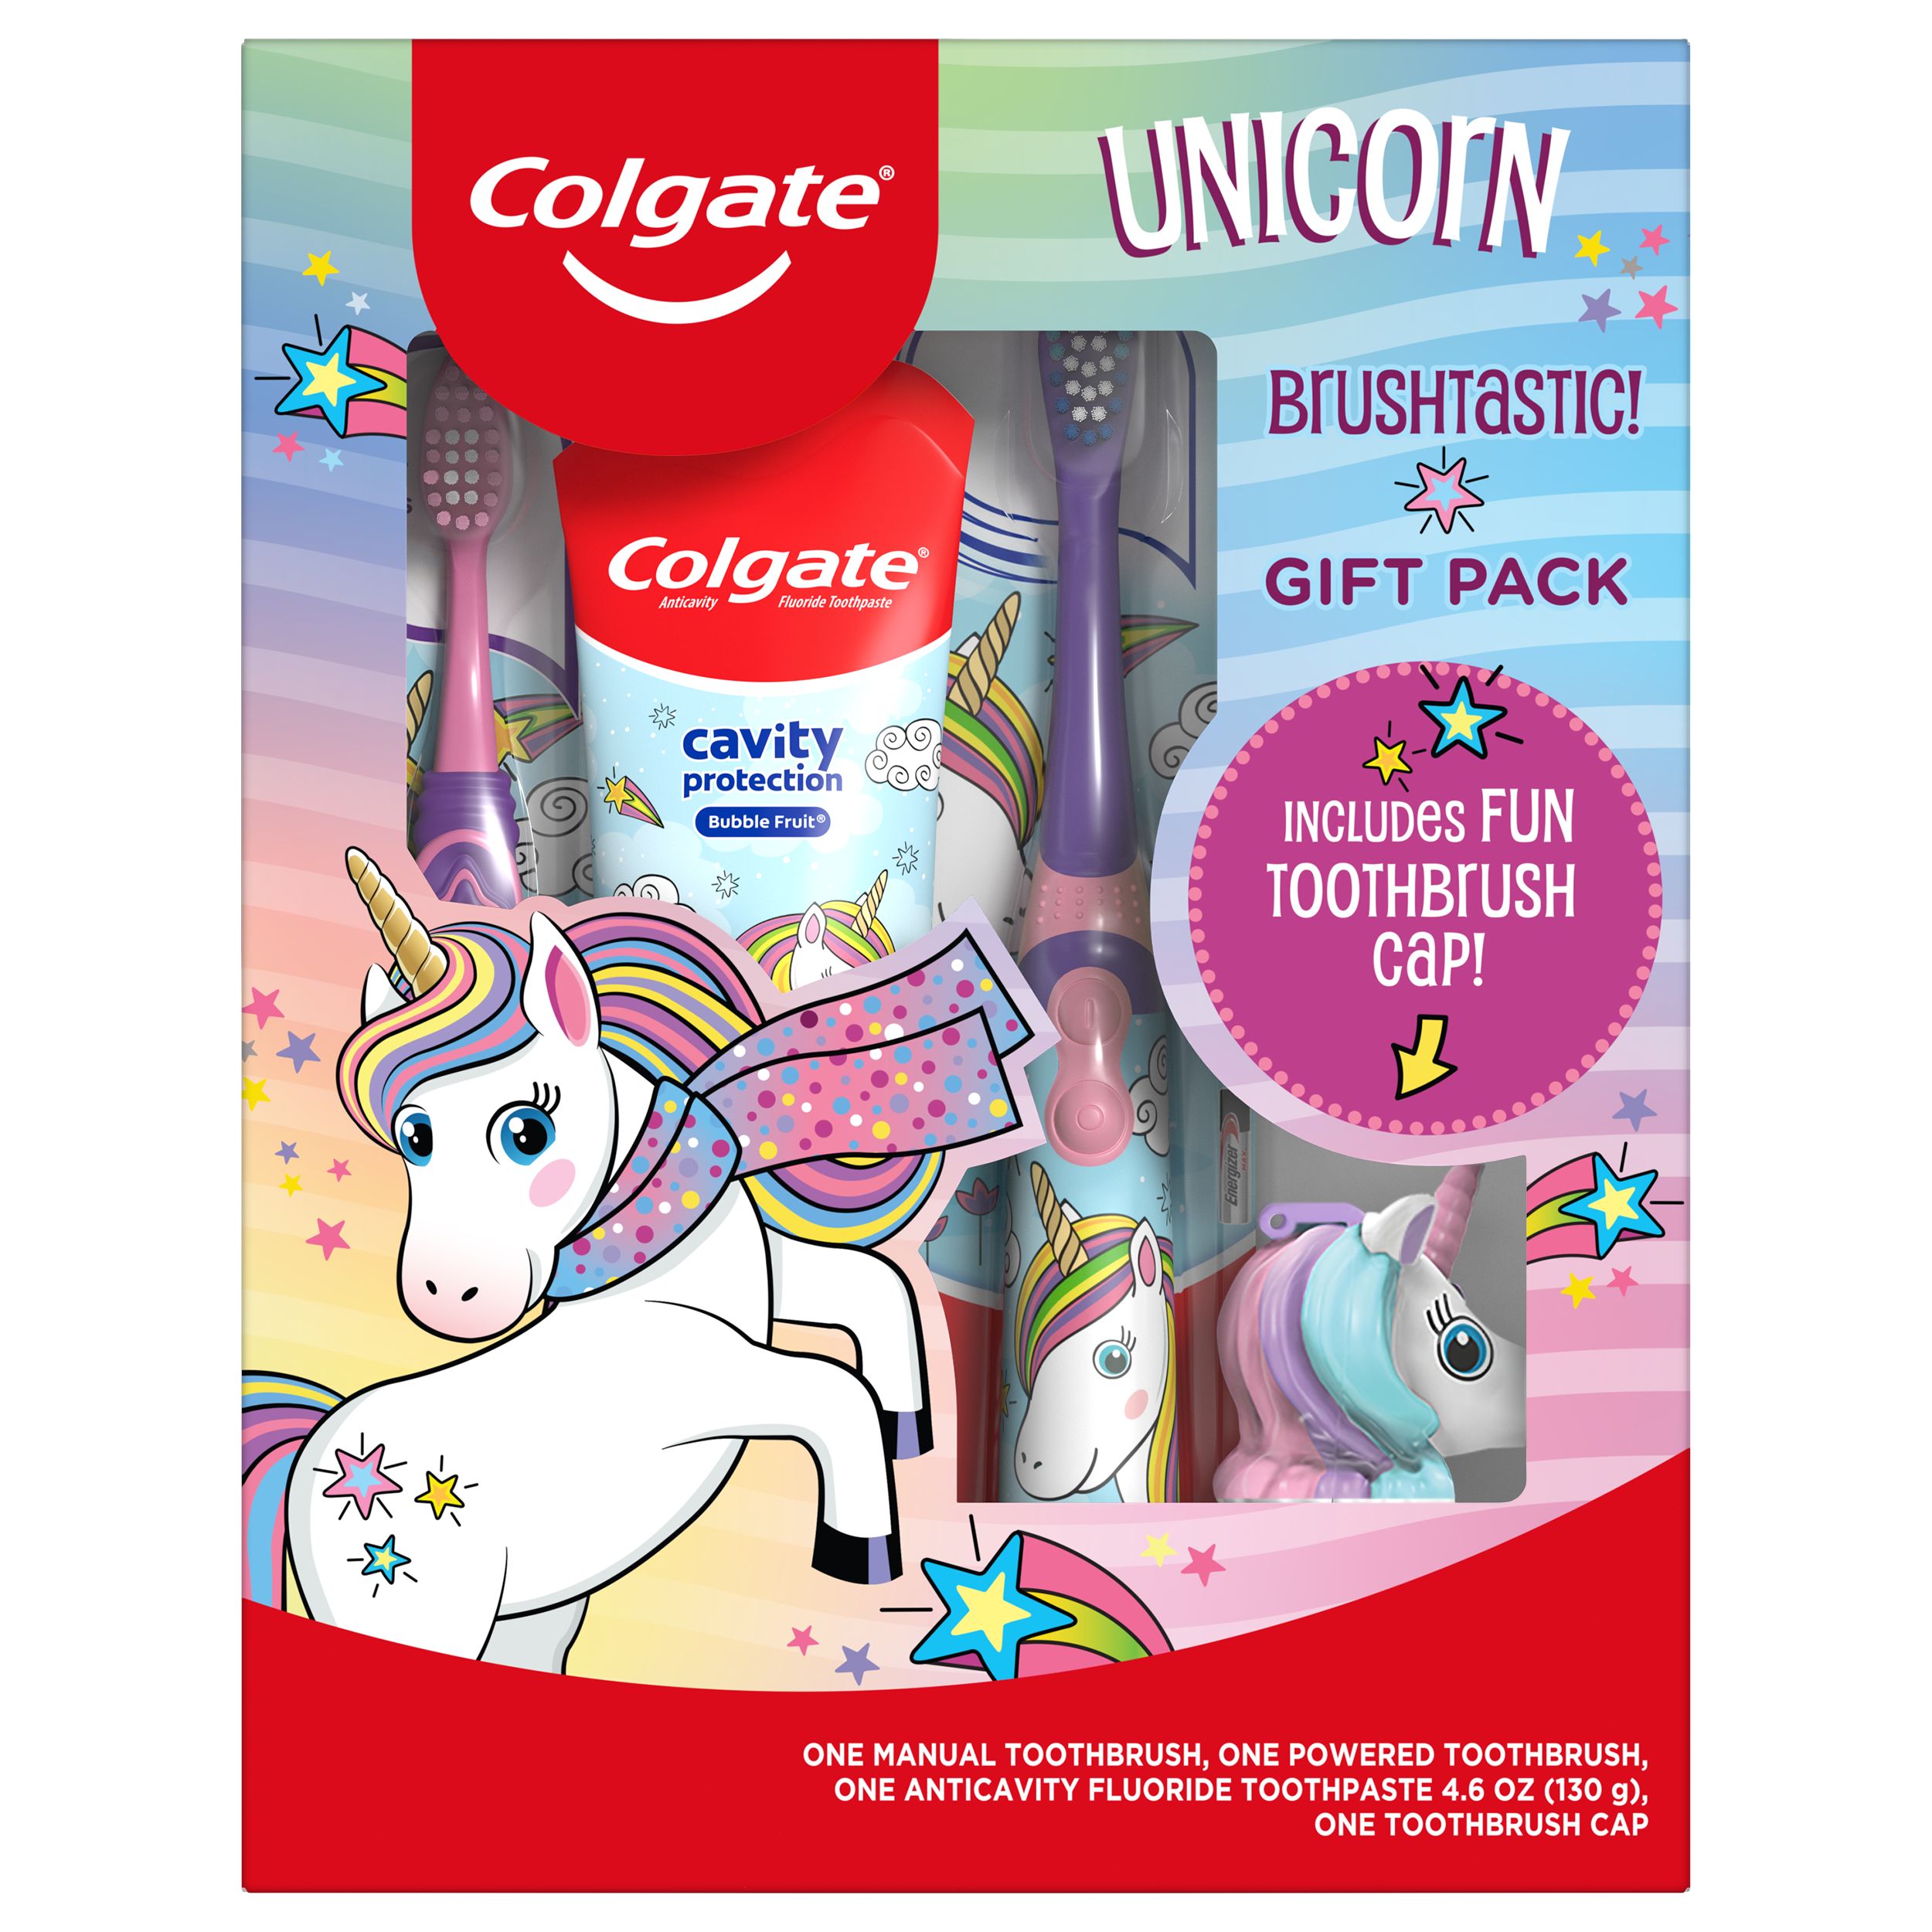 Colgate Kids Unicorn Gift Pack, Toothbrush Set with Toothpaste - image 1 of 14